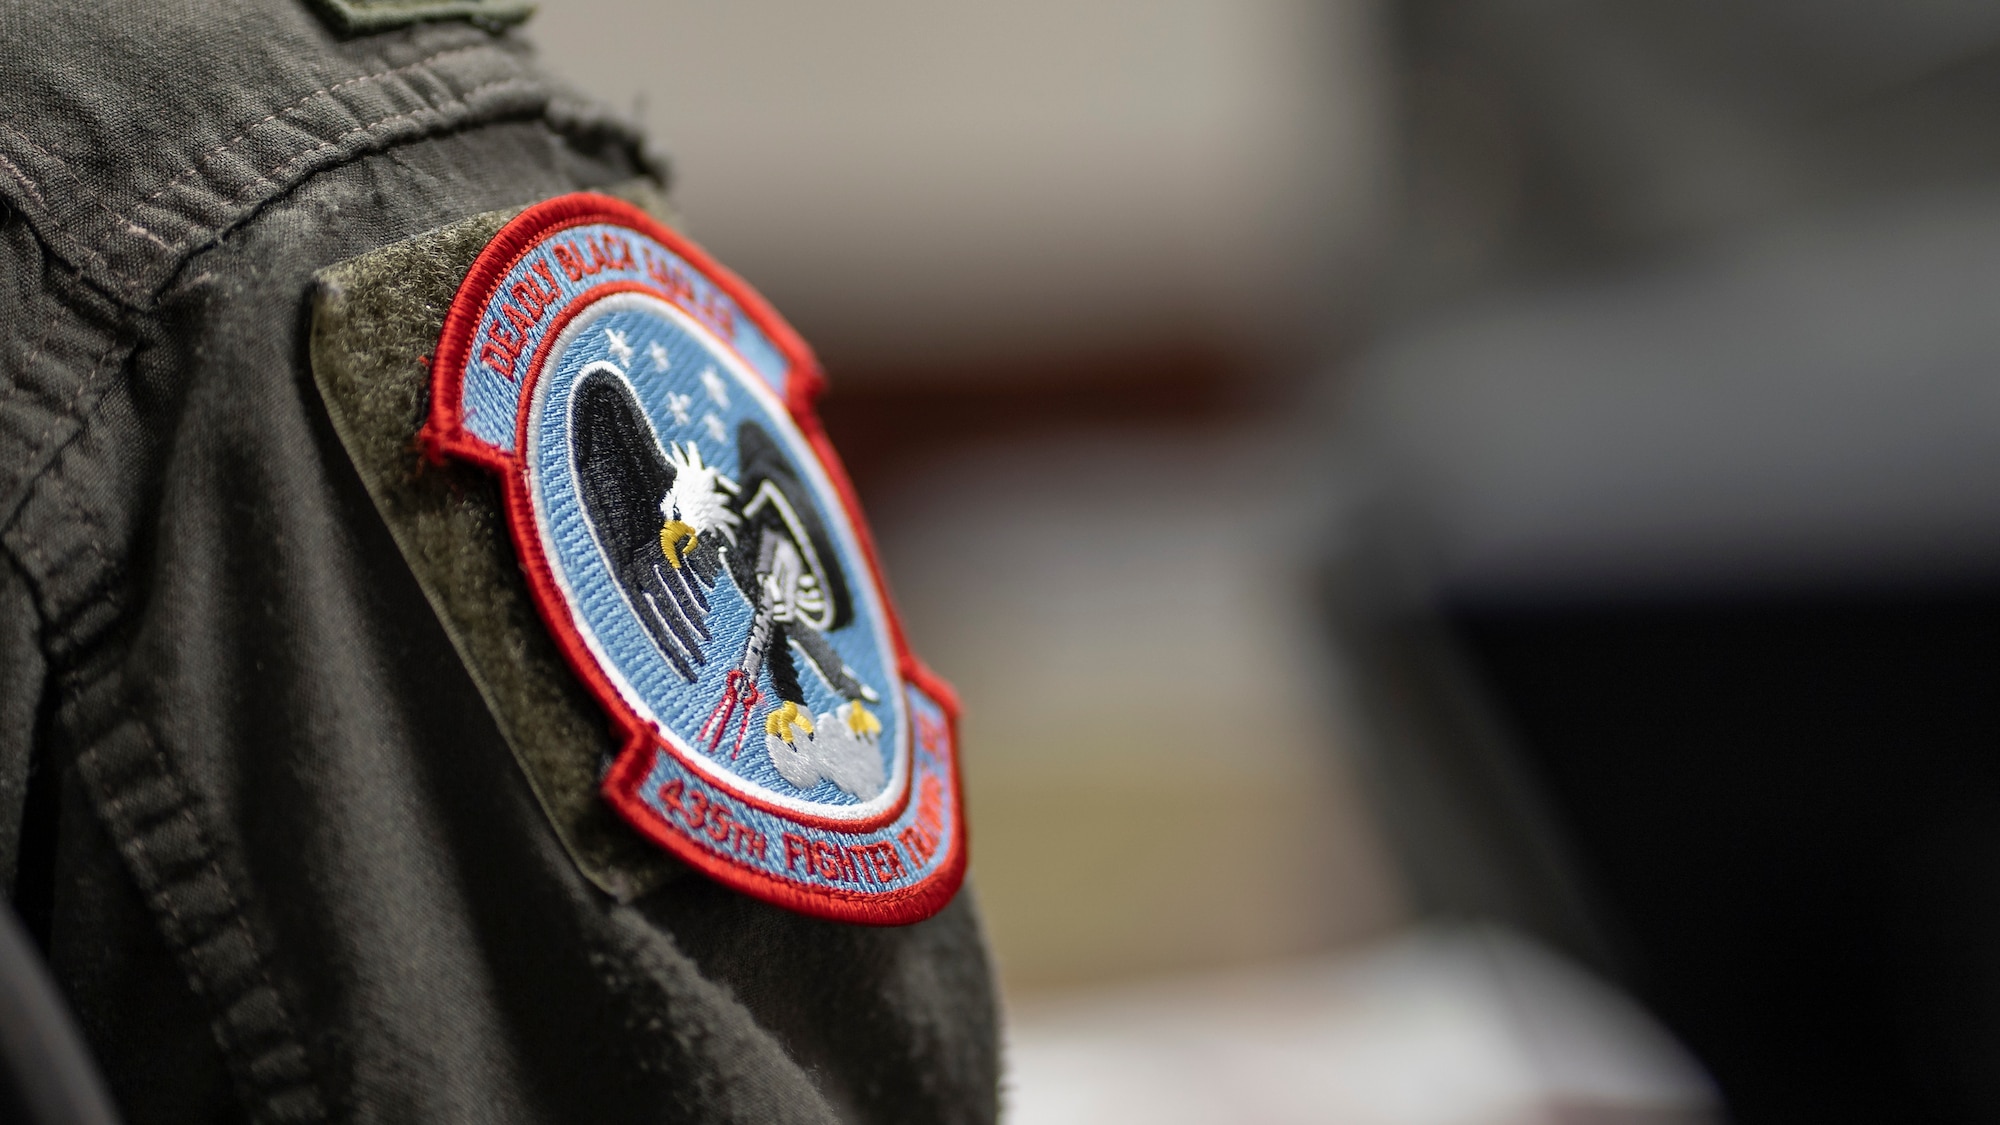 photo of 435th Fighter Training Squadron patch